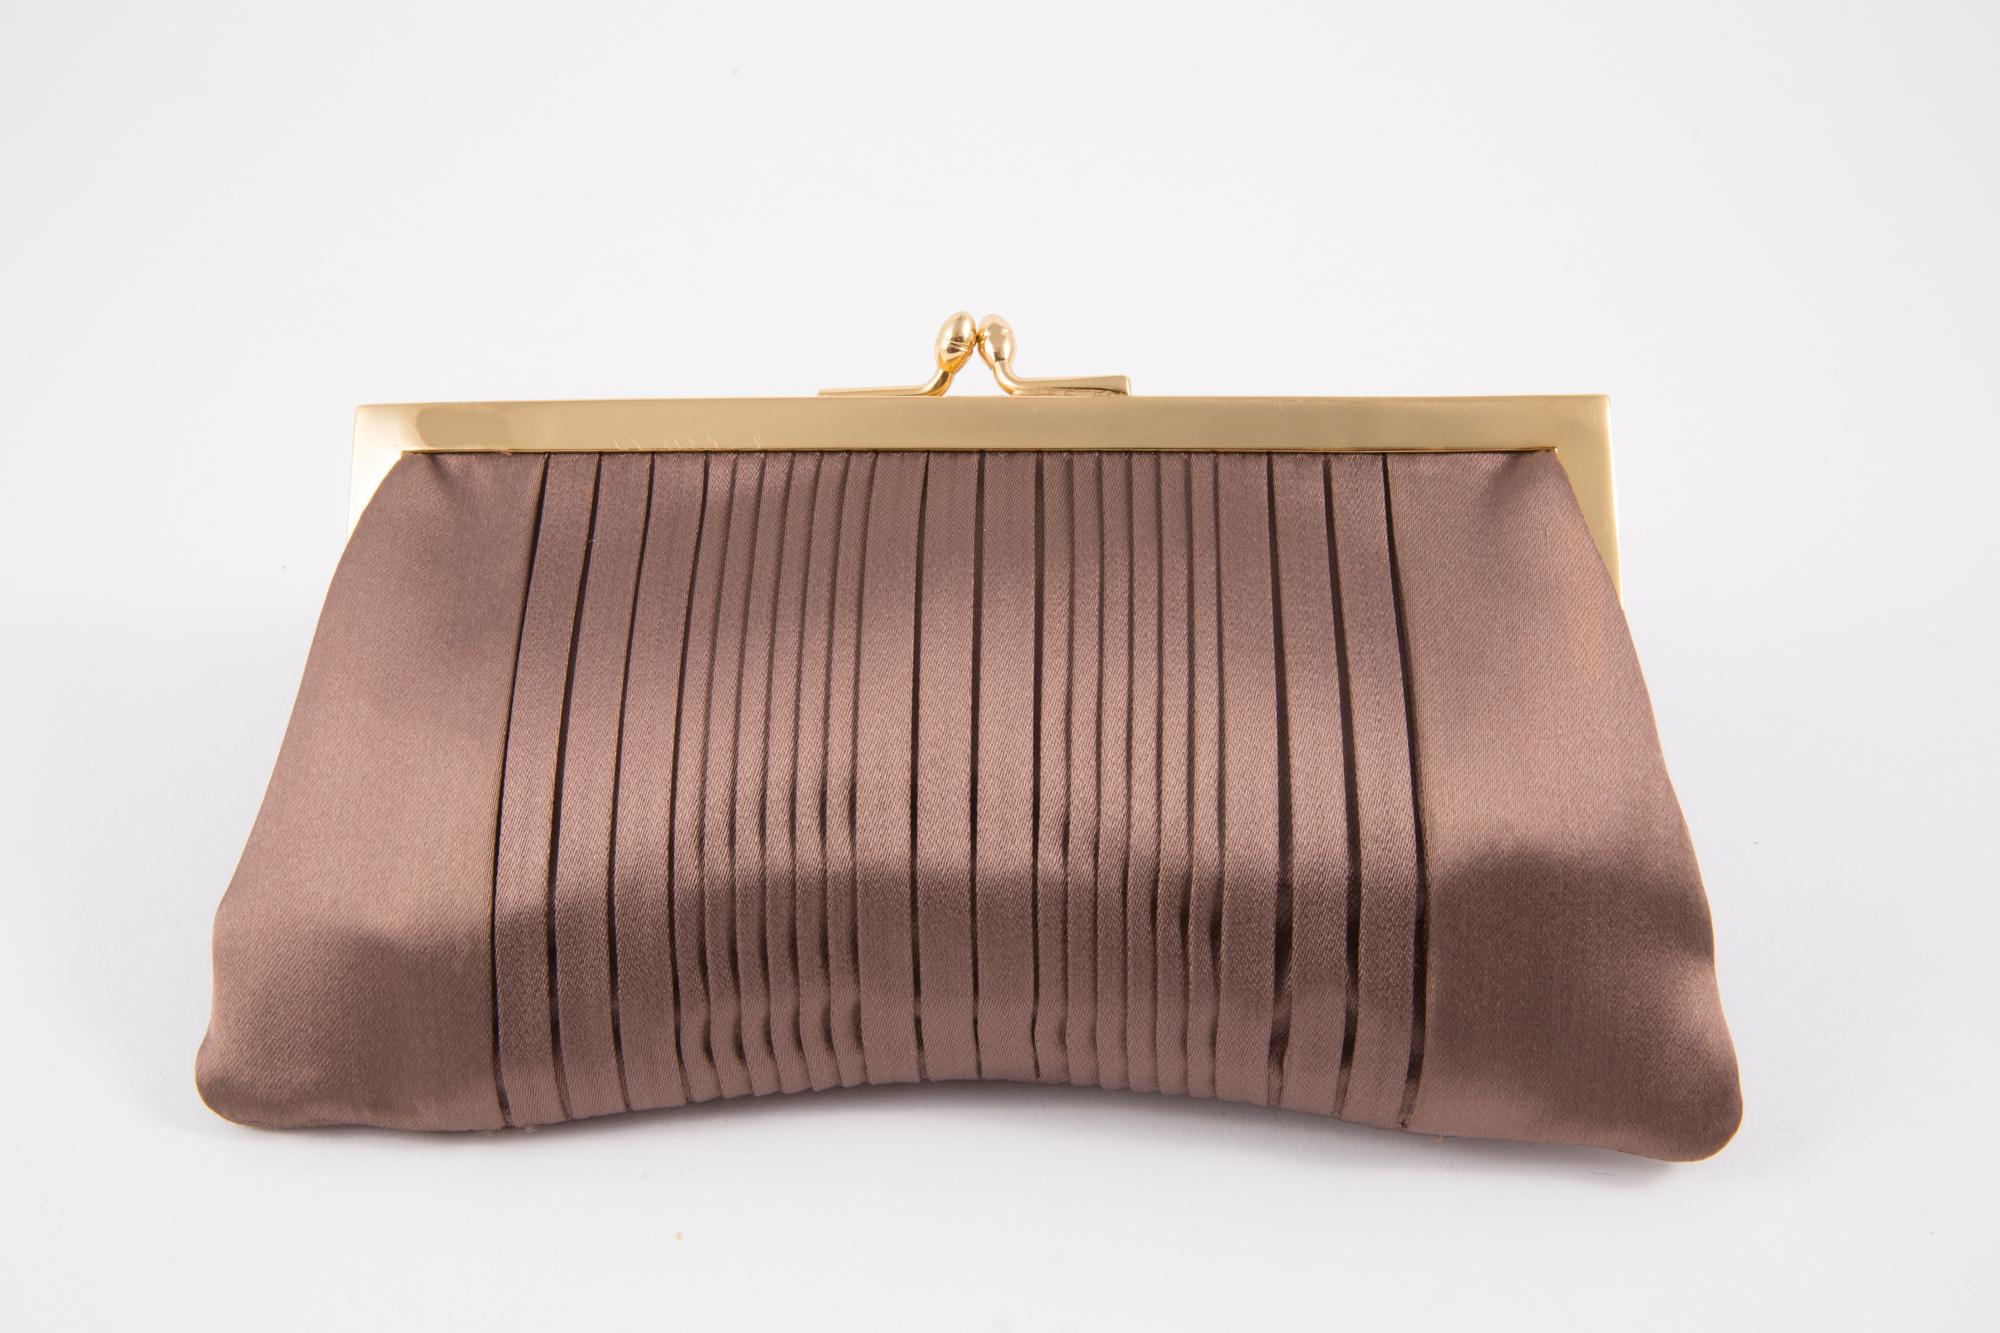 1960s Nut silk clutch featuring a center front pleat detail, a top gold tone claps opening, an inside ivory silk lining, an inside slip pocket.  
Length 8.4in. (21 cm)
Height 4.3in. (11cm)
Depth 0.8in. (2cm)
In good vintage condition. Made in